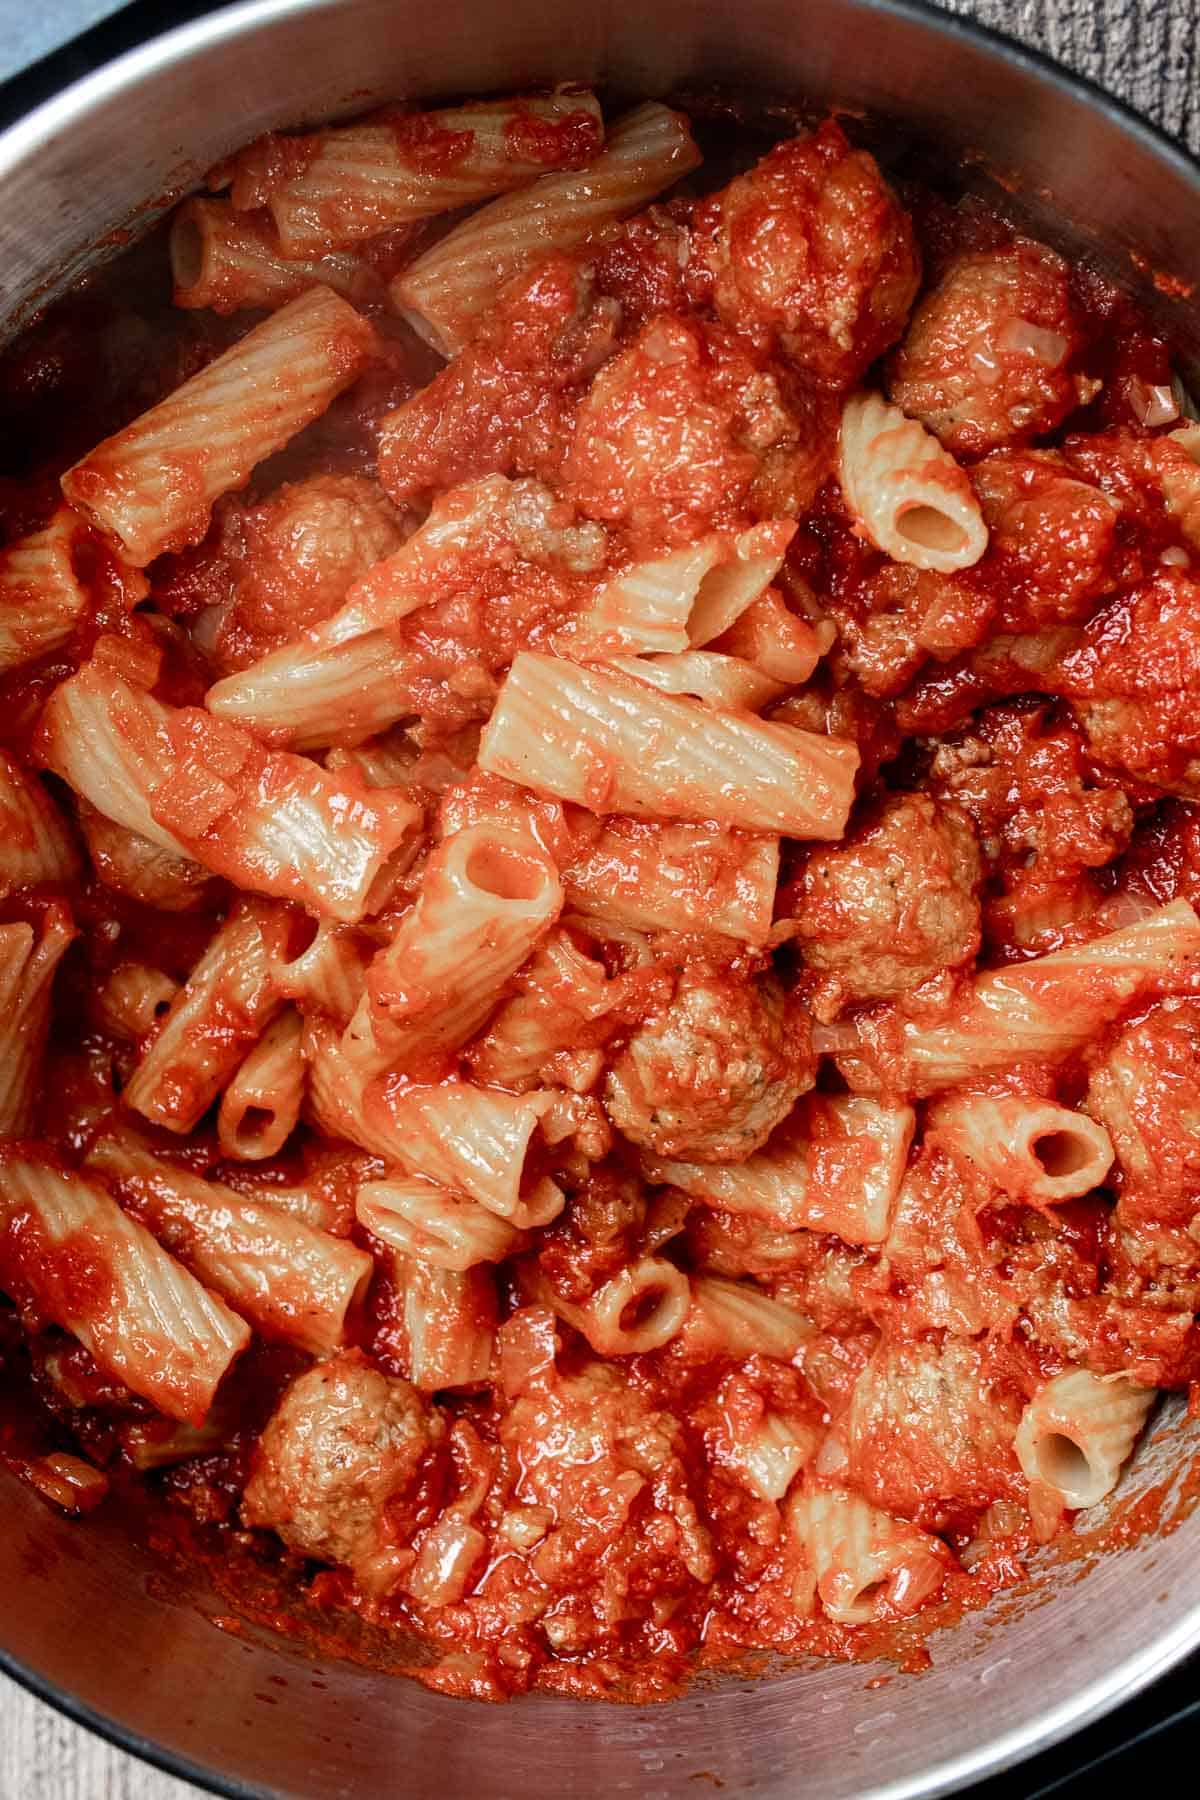 Once pasta is al dente, add the sauce and meats for baked rigatoni and stir together in pot.